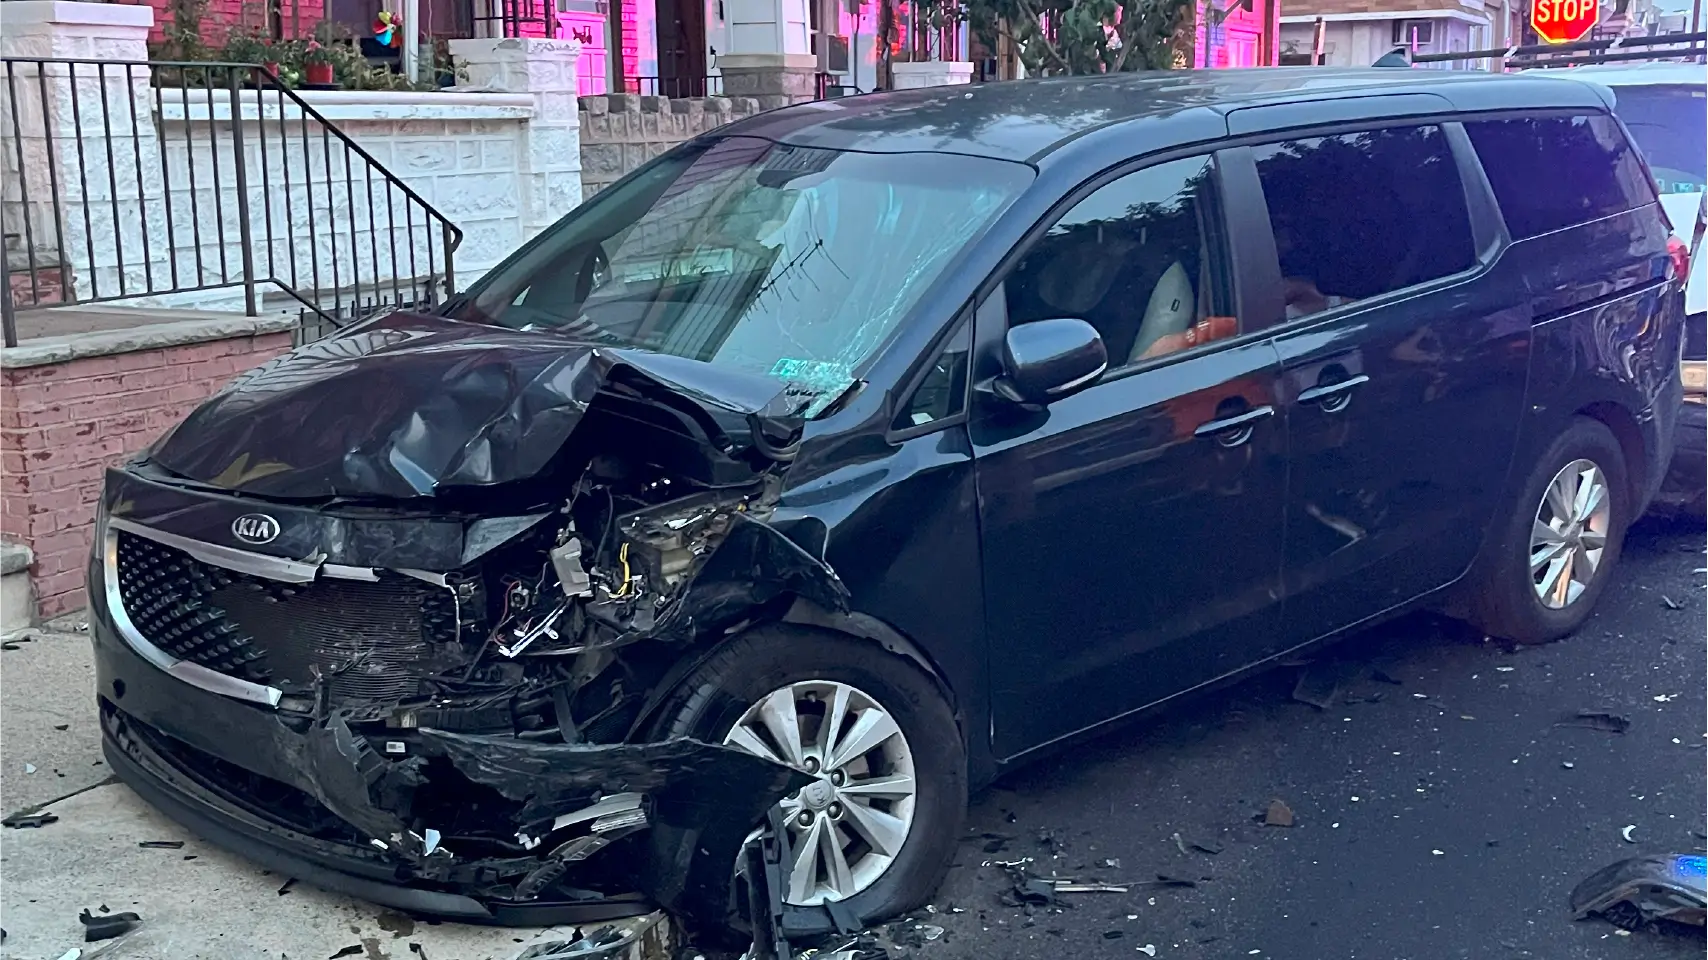 Front view of a heavily damaged black Kia minivan involved in a serious accident, illustrating the concept of total loss vehicle under Texas law.